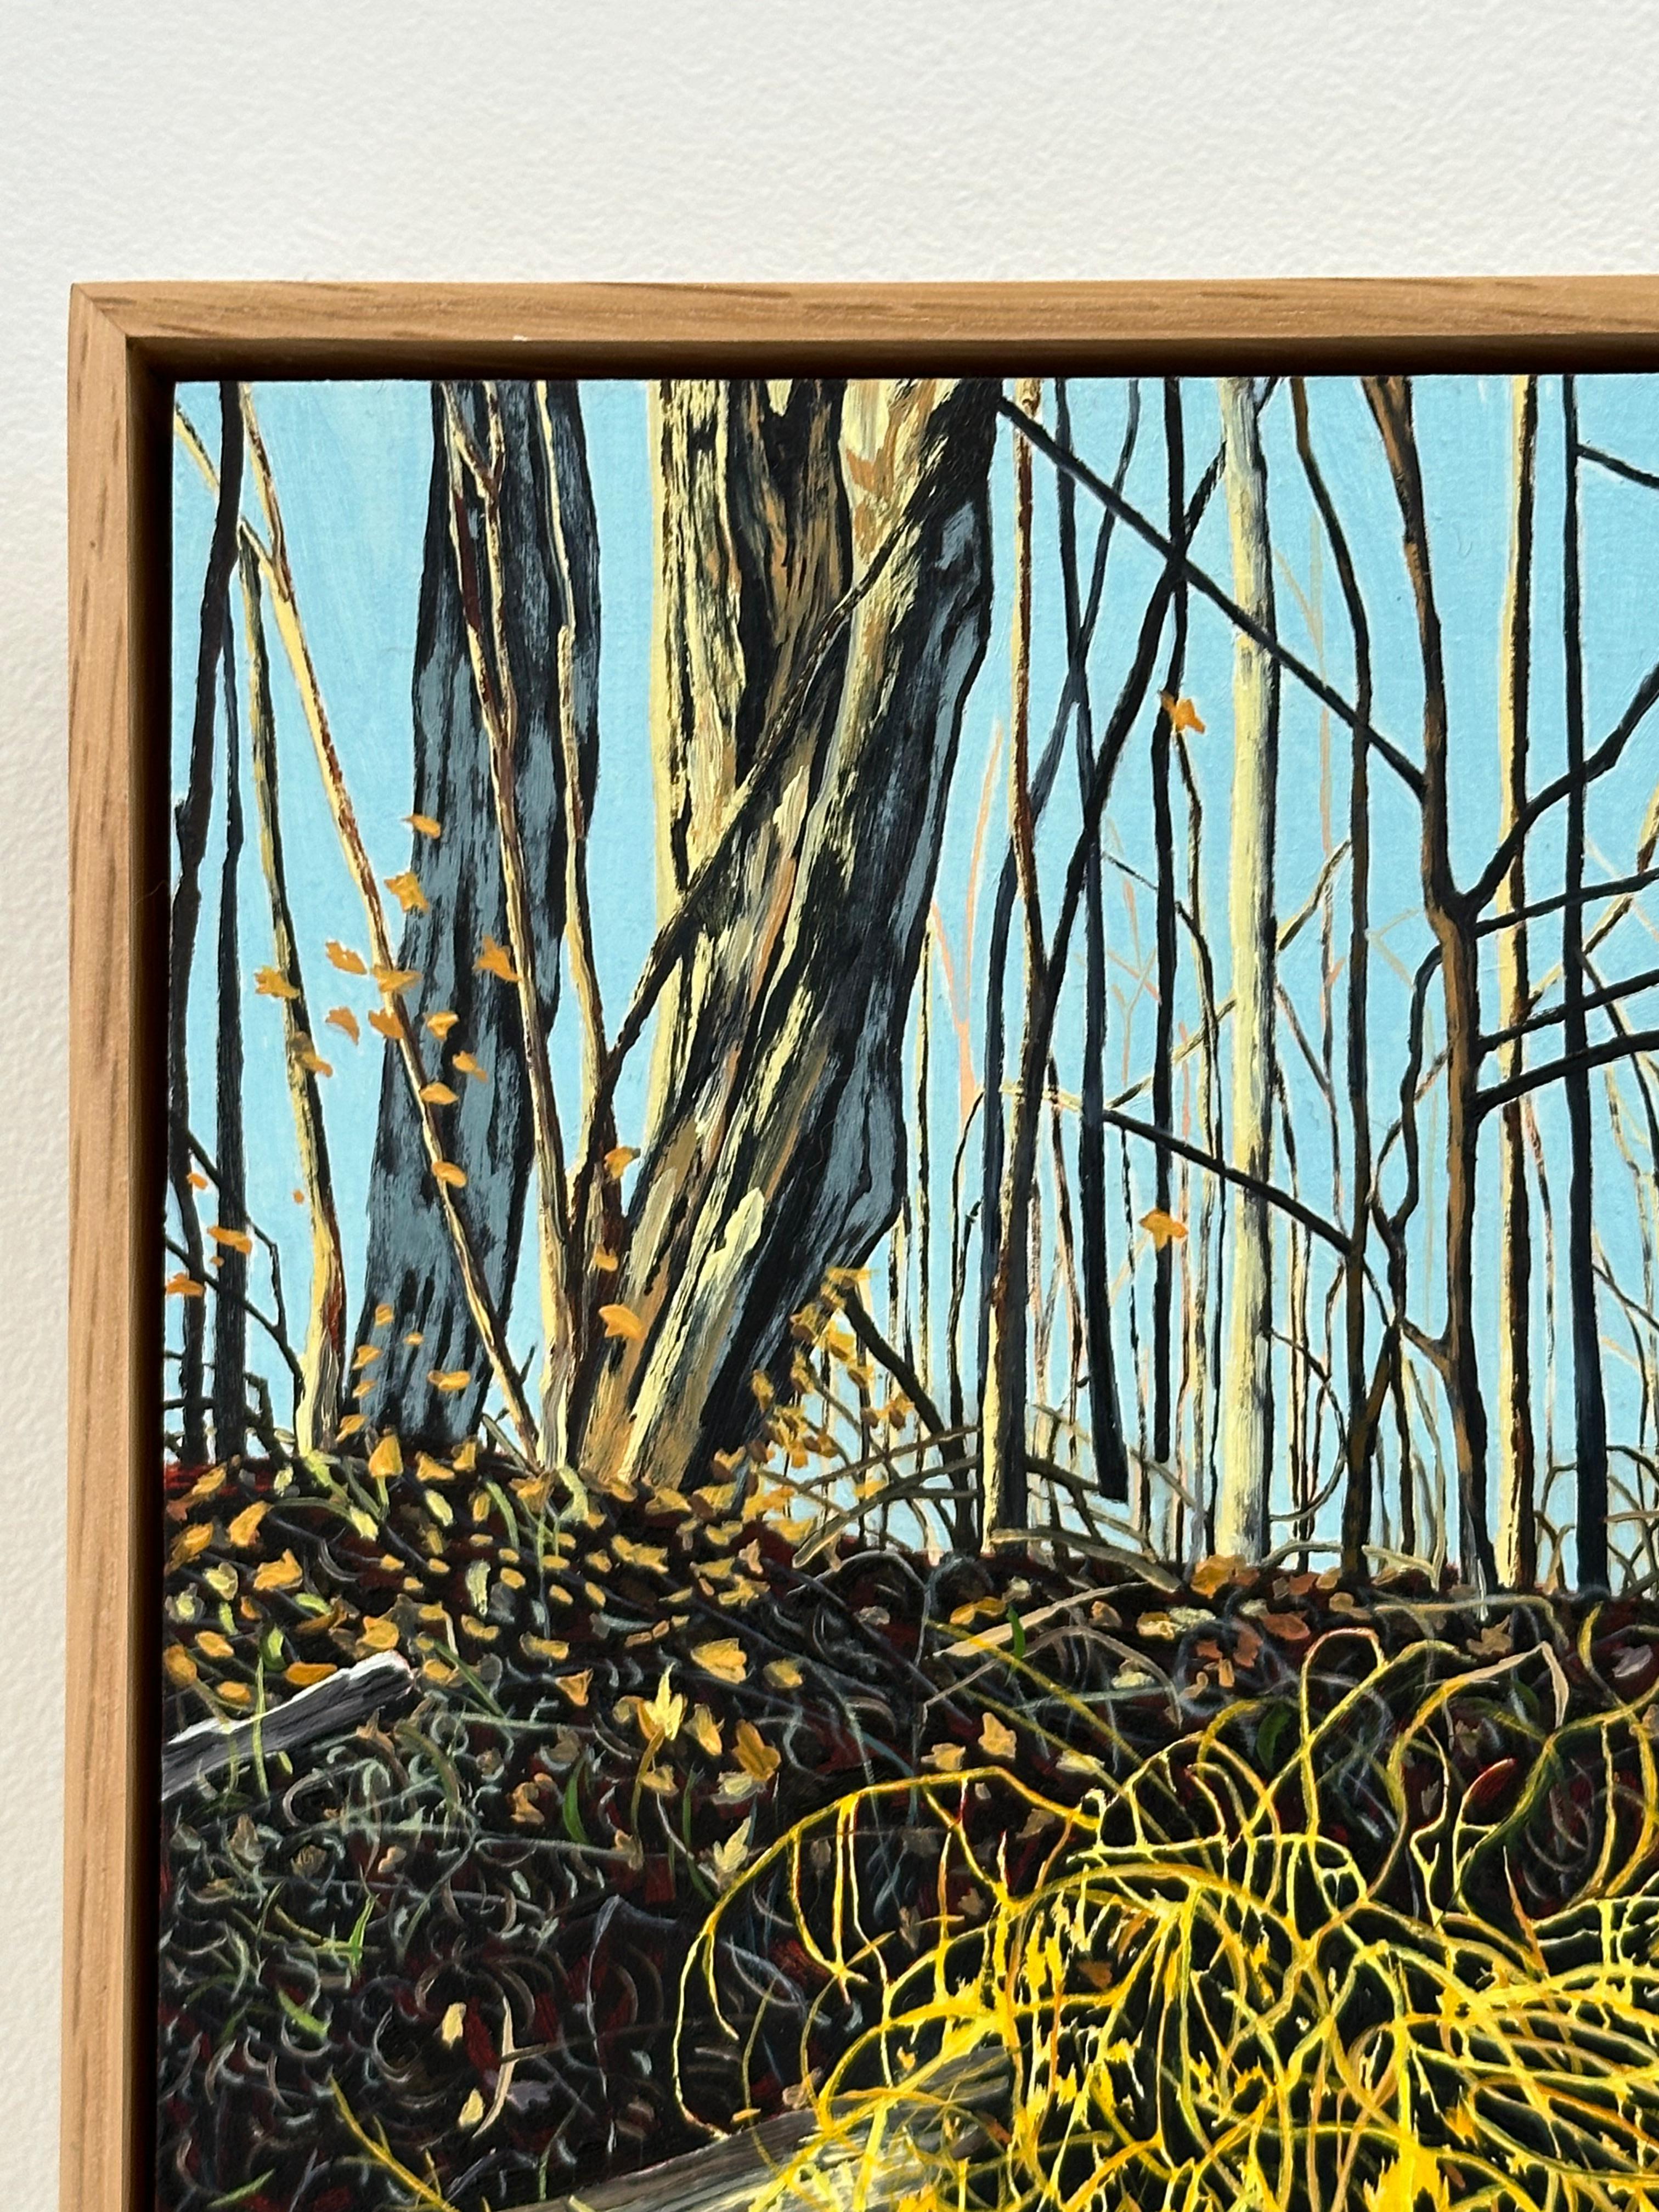 Wild Asparagus, Yellow Bush in Forest, Trees, Blue Sky, Leaves on Ground - Contemporary Painting by Amanda Acker